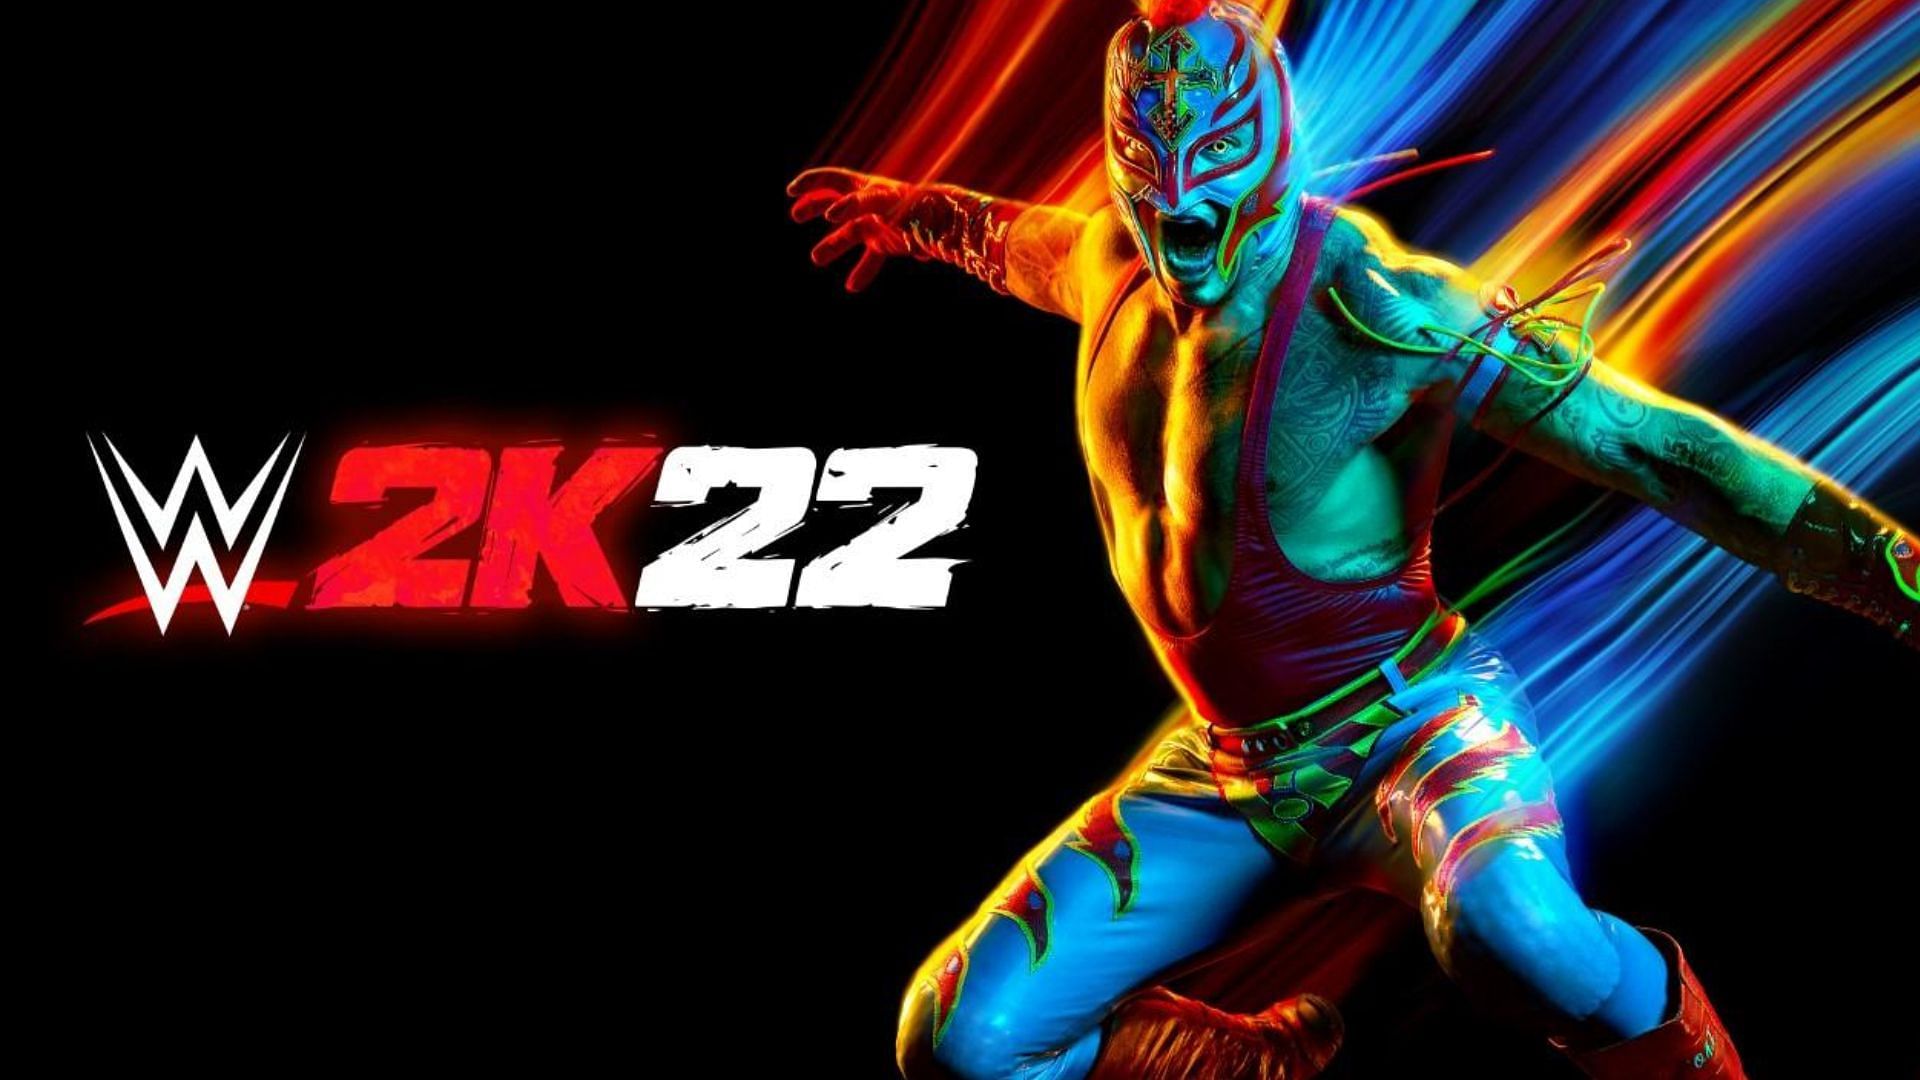 Rey Mysterio is the cover superstar for WWE 2K22